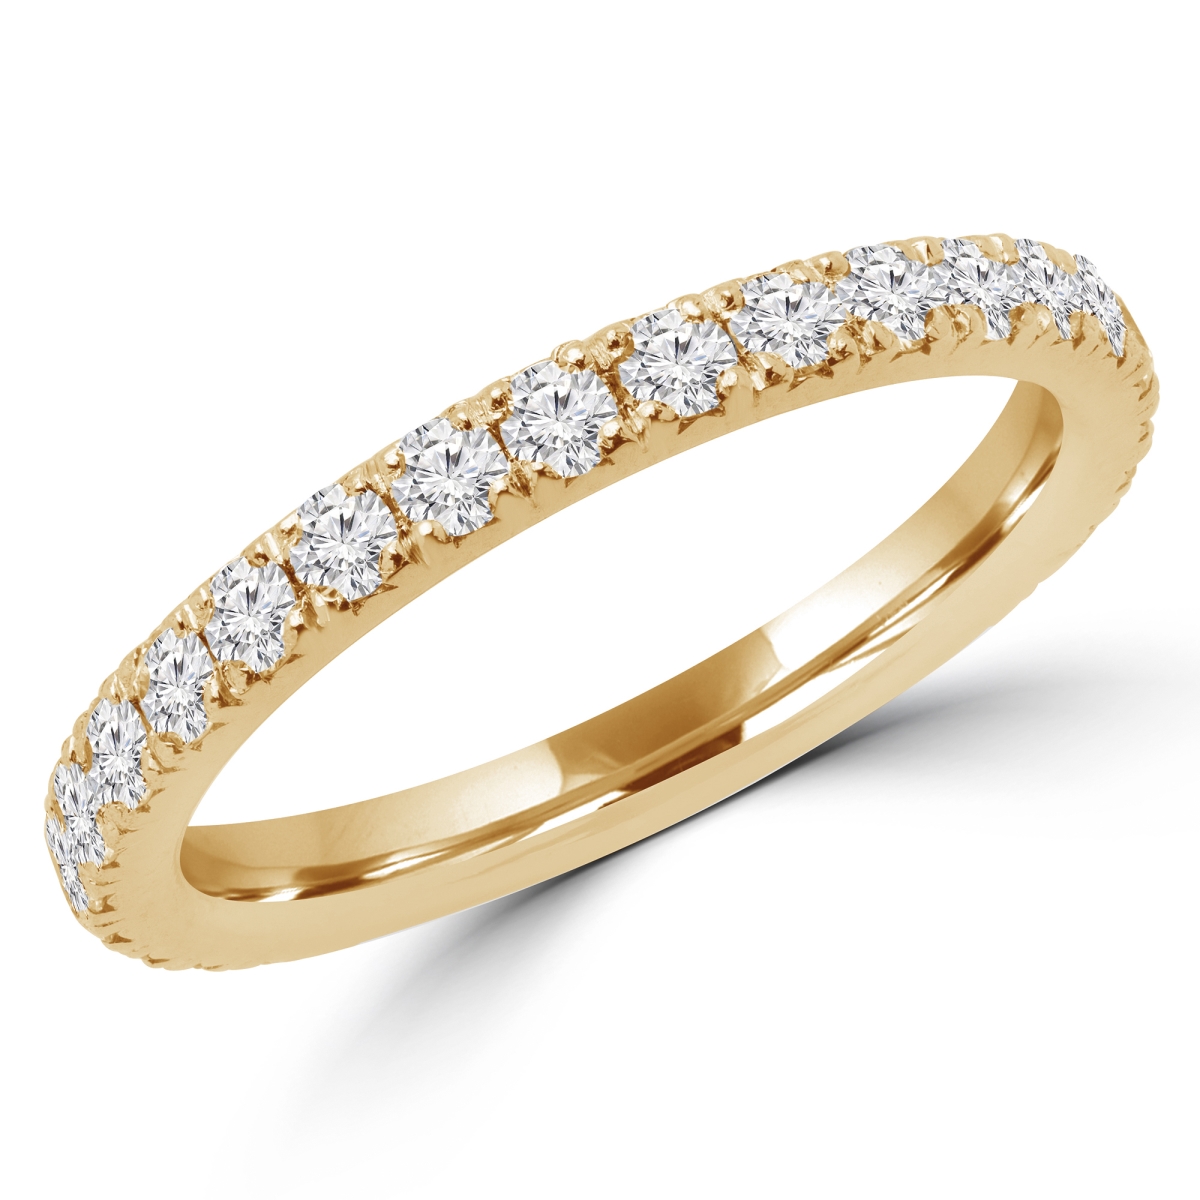 Picture of Majesty Diamonds MD180192-4.5 0.6 CTW Round Diamond Semi-Eternity Wedding Band Ring in 14K Yellow Gold - Size 4.5